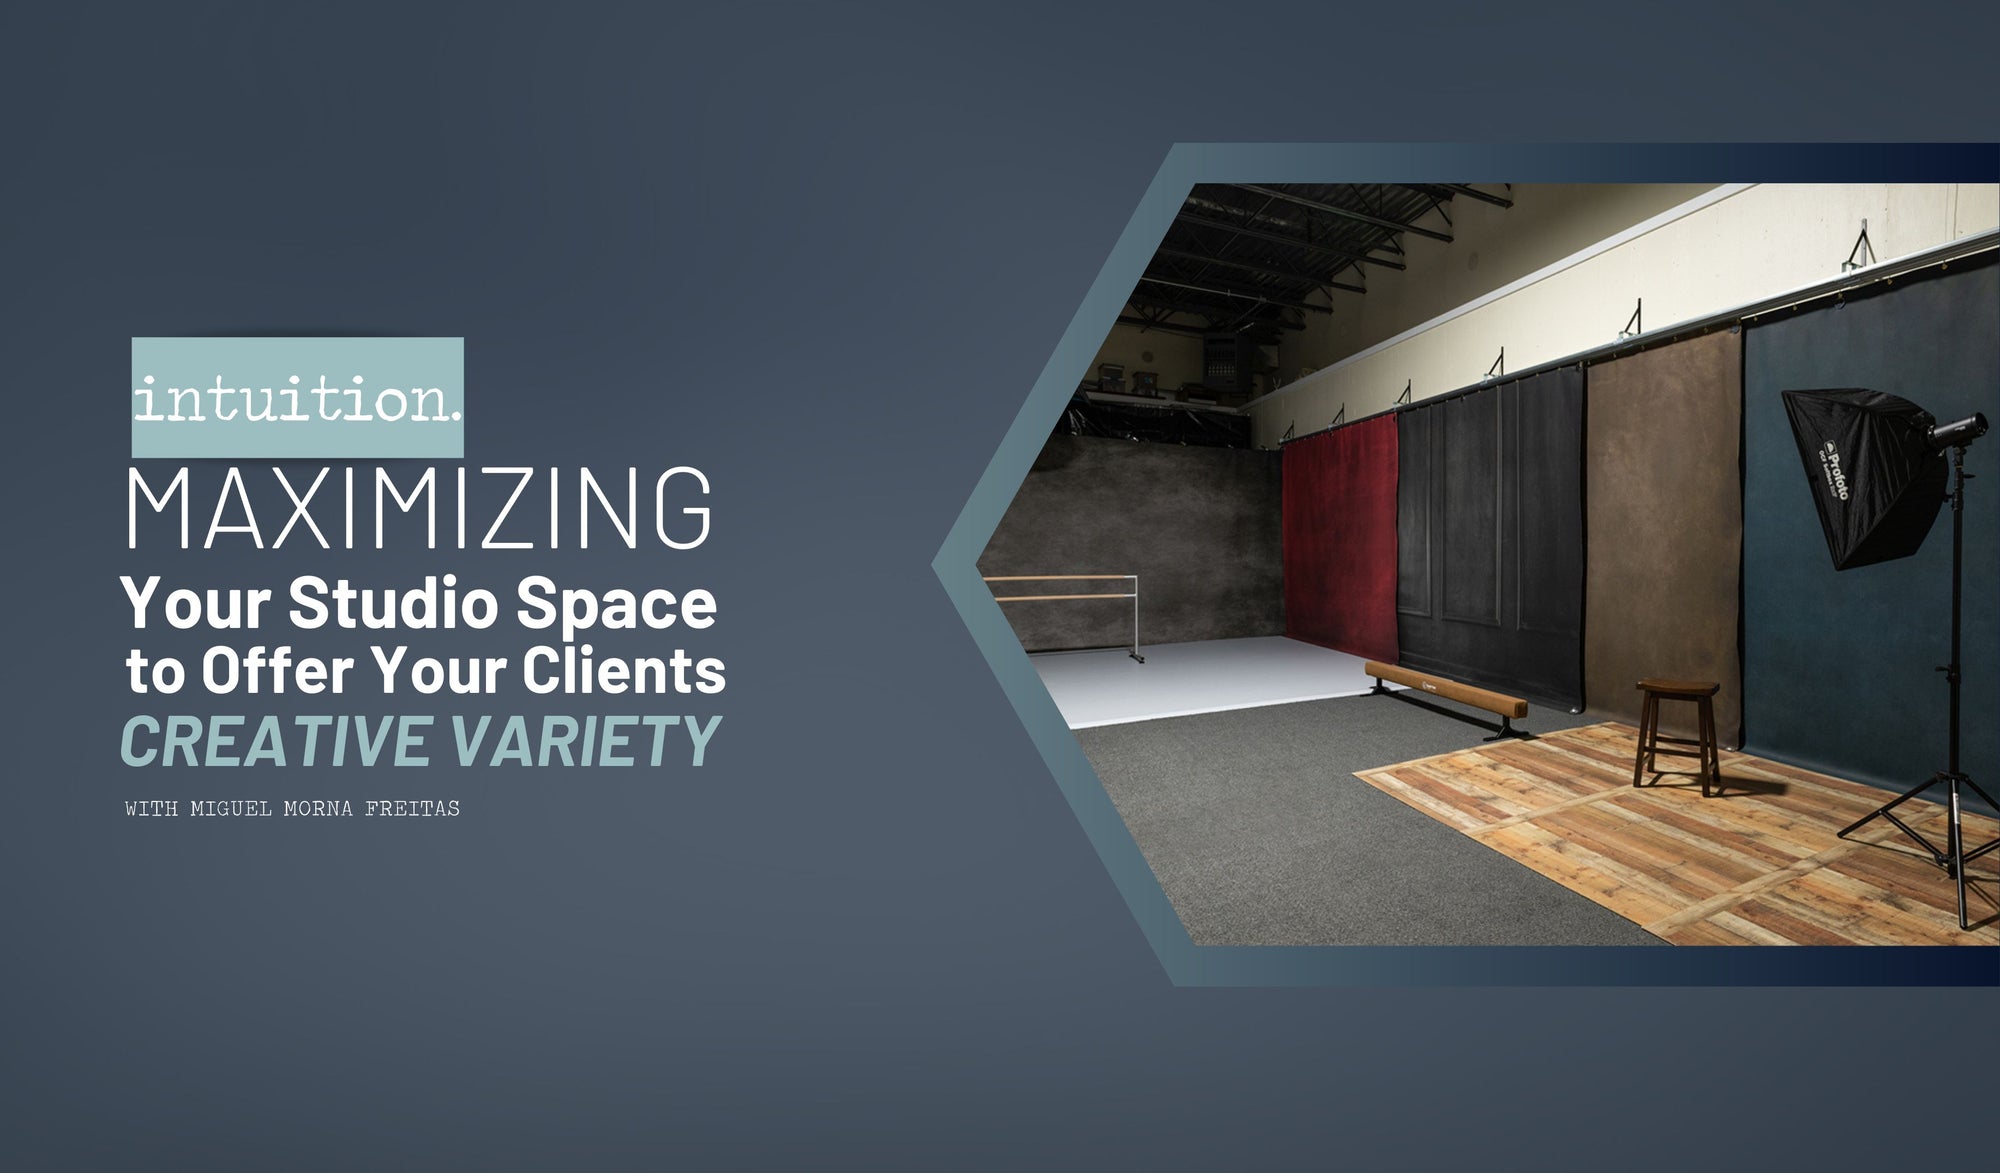 MAXIMIZING YOUR STUDIO SPACE TO OFFER YOUR CLIENTS CREATIVE VARIETY WITH MIGUEL MORNA FREITAS